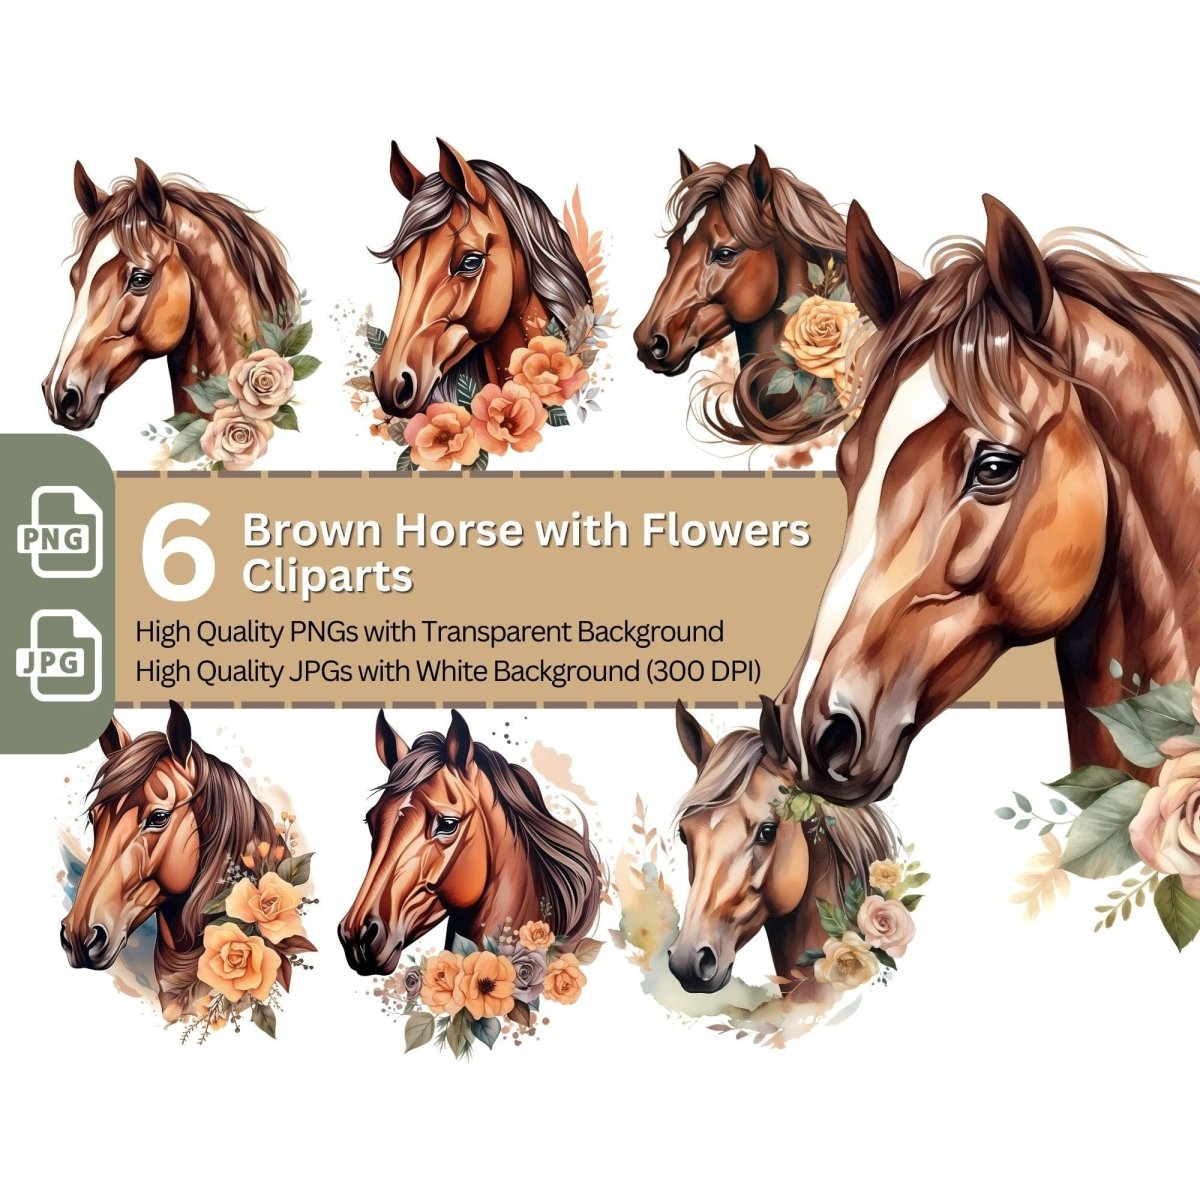 Brown Horse with Flowers Cliparts 6+6 High Quality PNG Animal Clipart - Everything Pixel